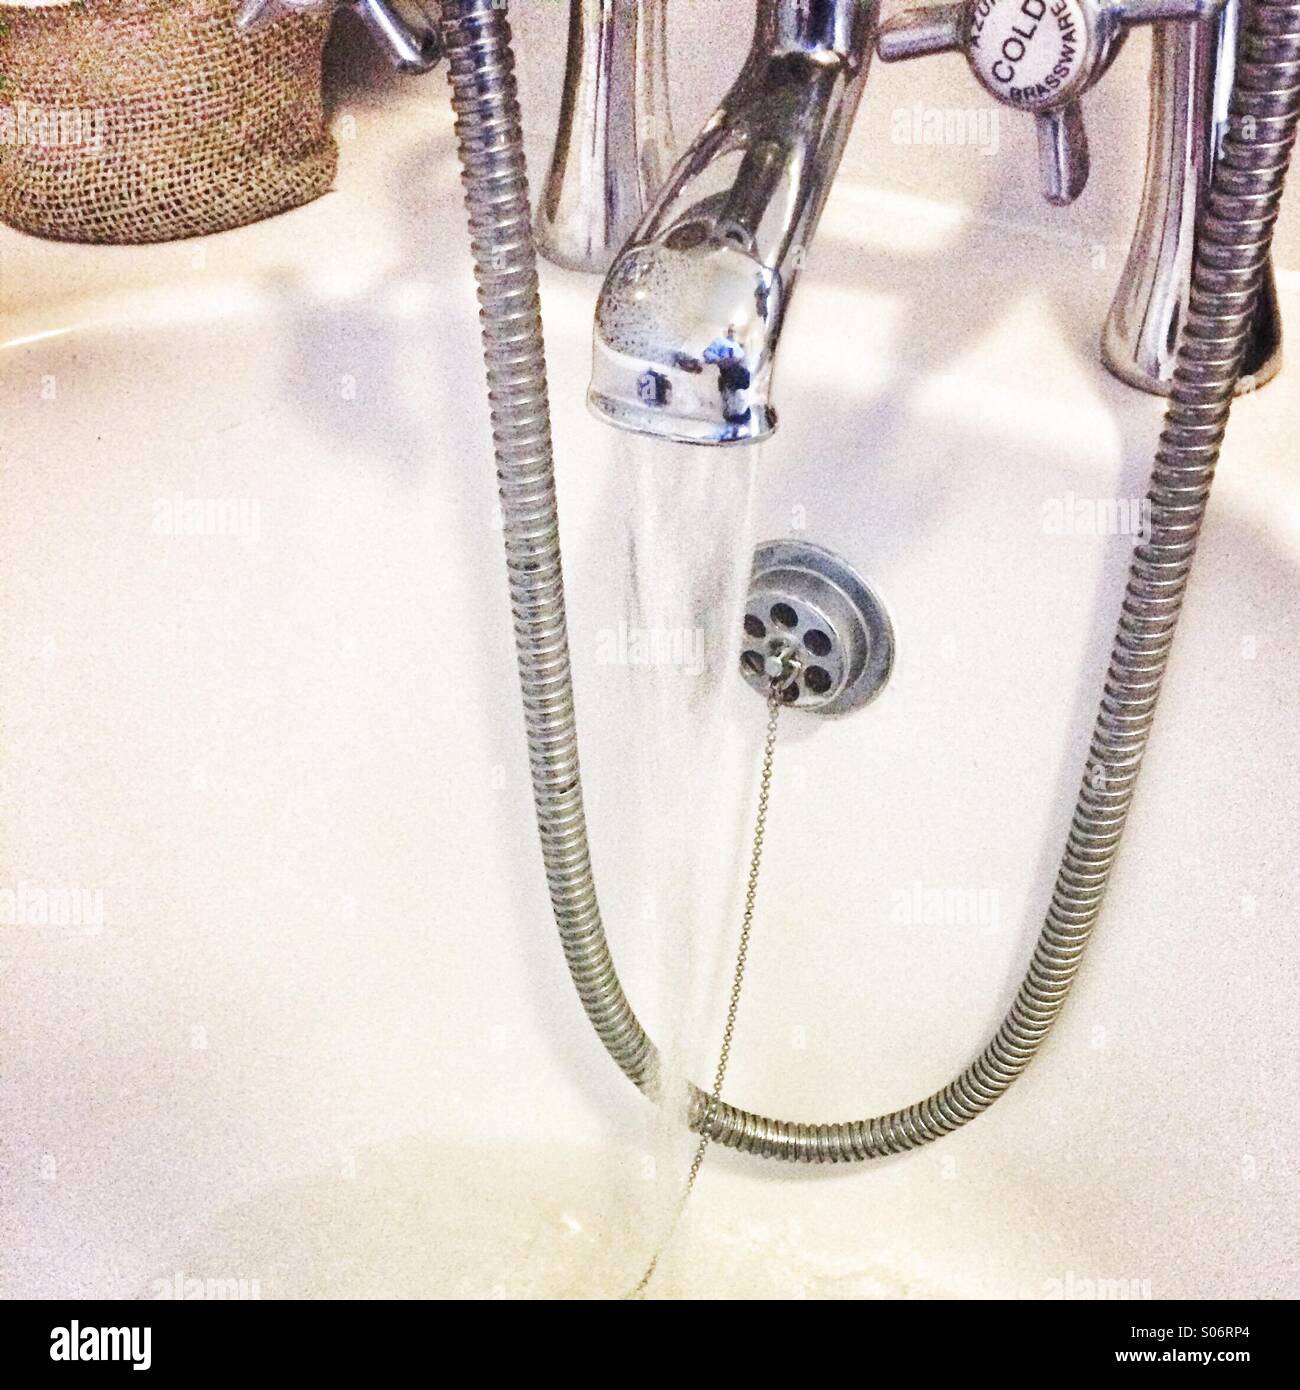 A flowing bath tap Stock Photo